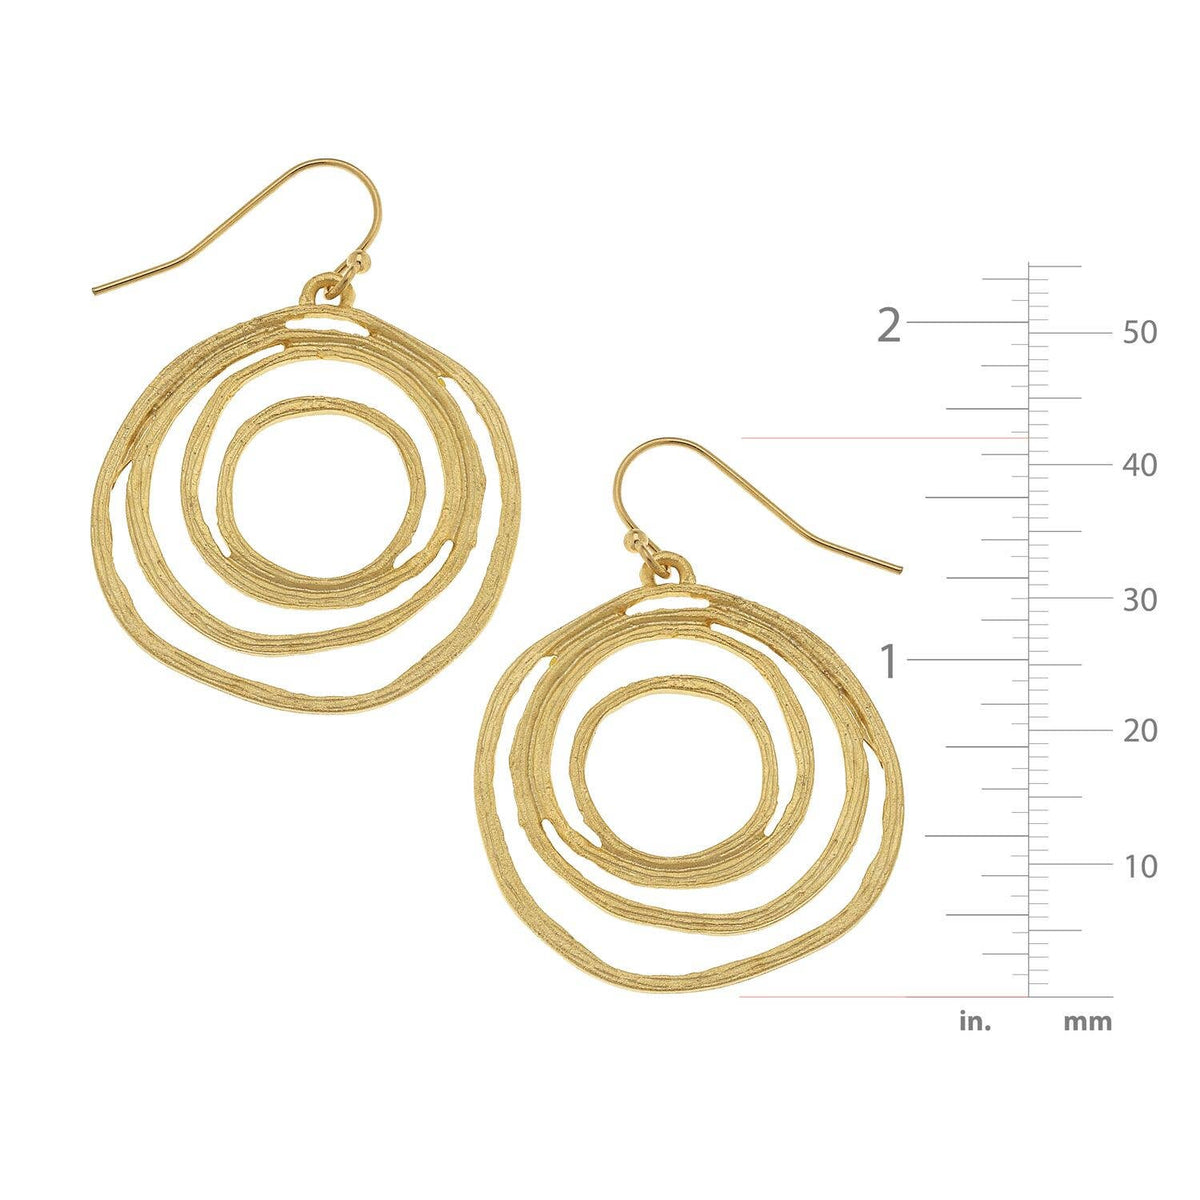 Susan Shaw | Gold Filigree Cut Out Earrings